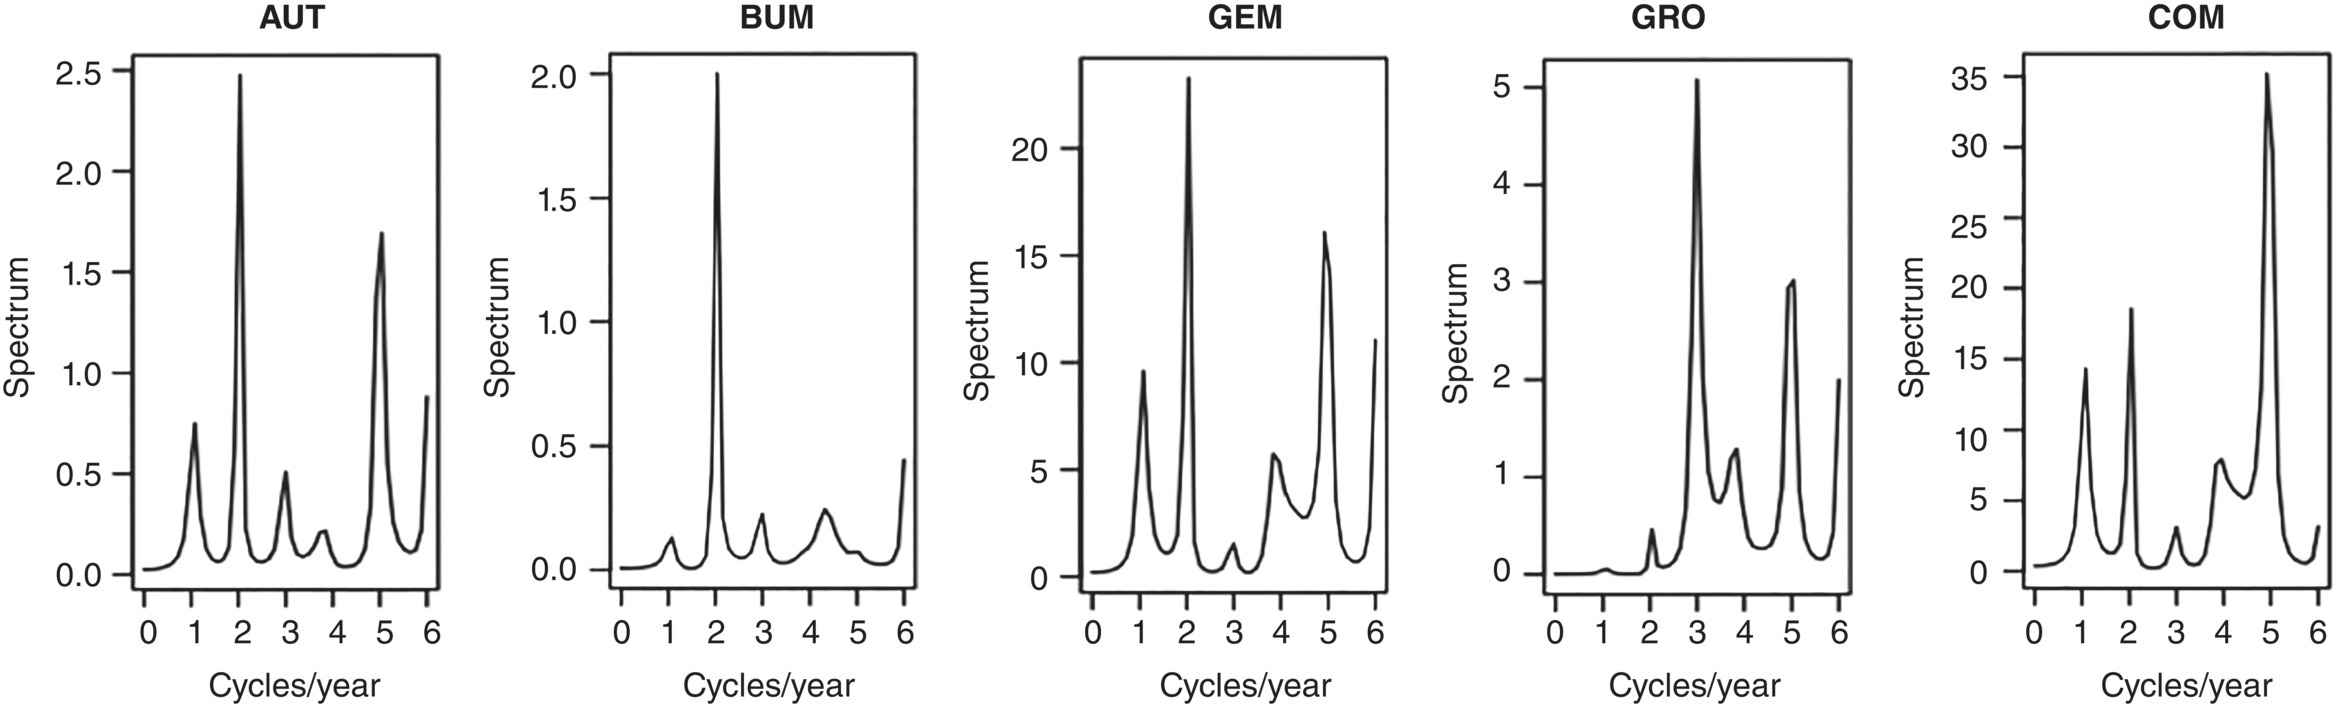 5 Graphs for AUT, BUM, GEM, GRO, and COM (left–right) depicting the estimated power spectra by using the VAR(4) model.